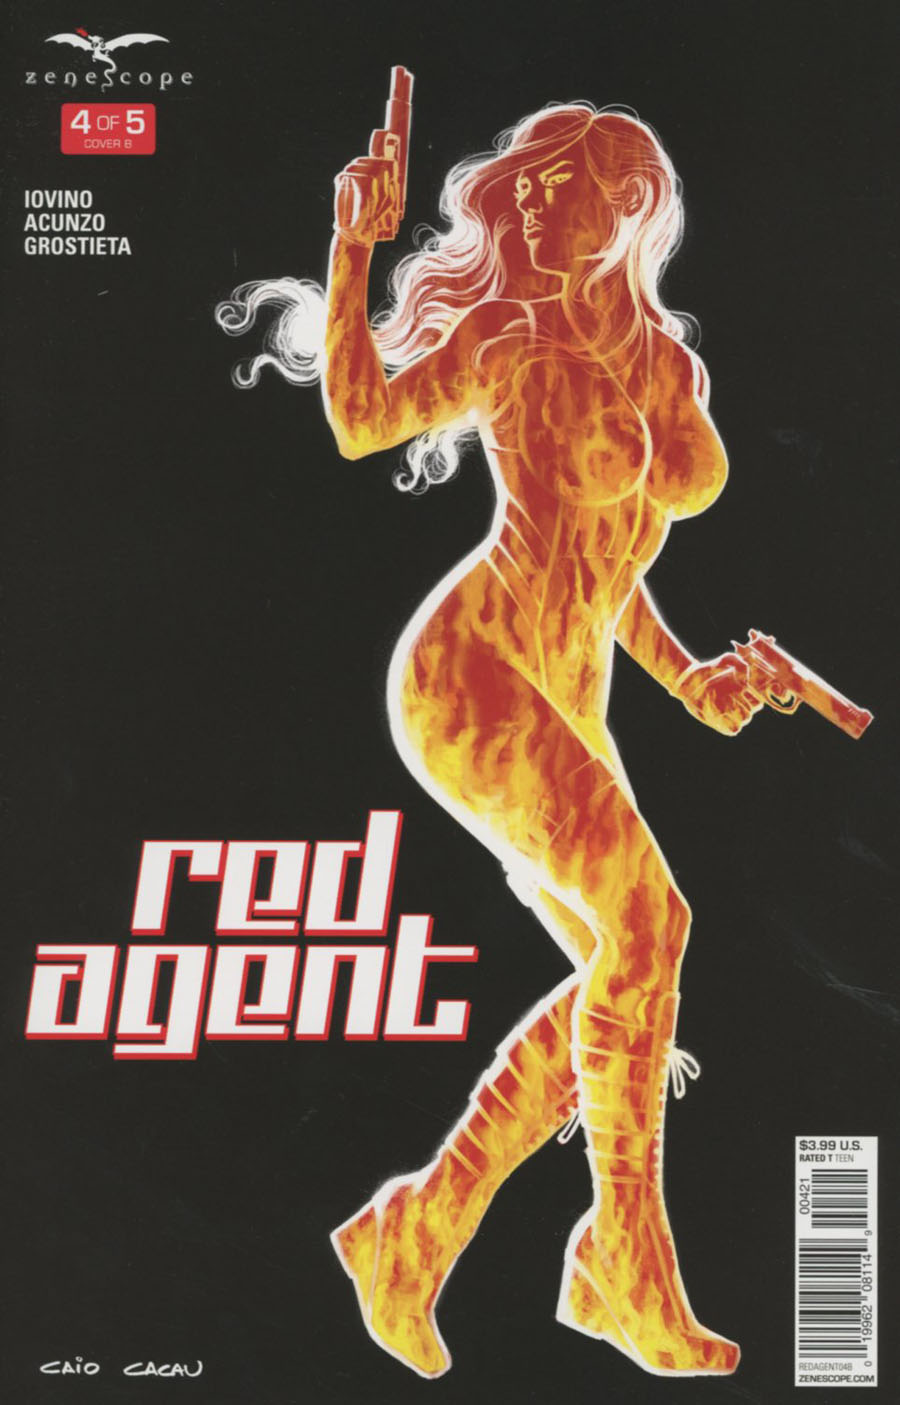 Grimm Fairy Tales Presents Red Agent #4 Cover B Caio Cacau